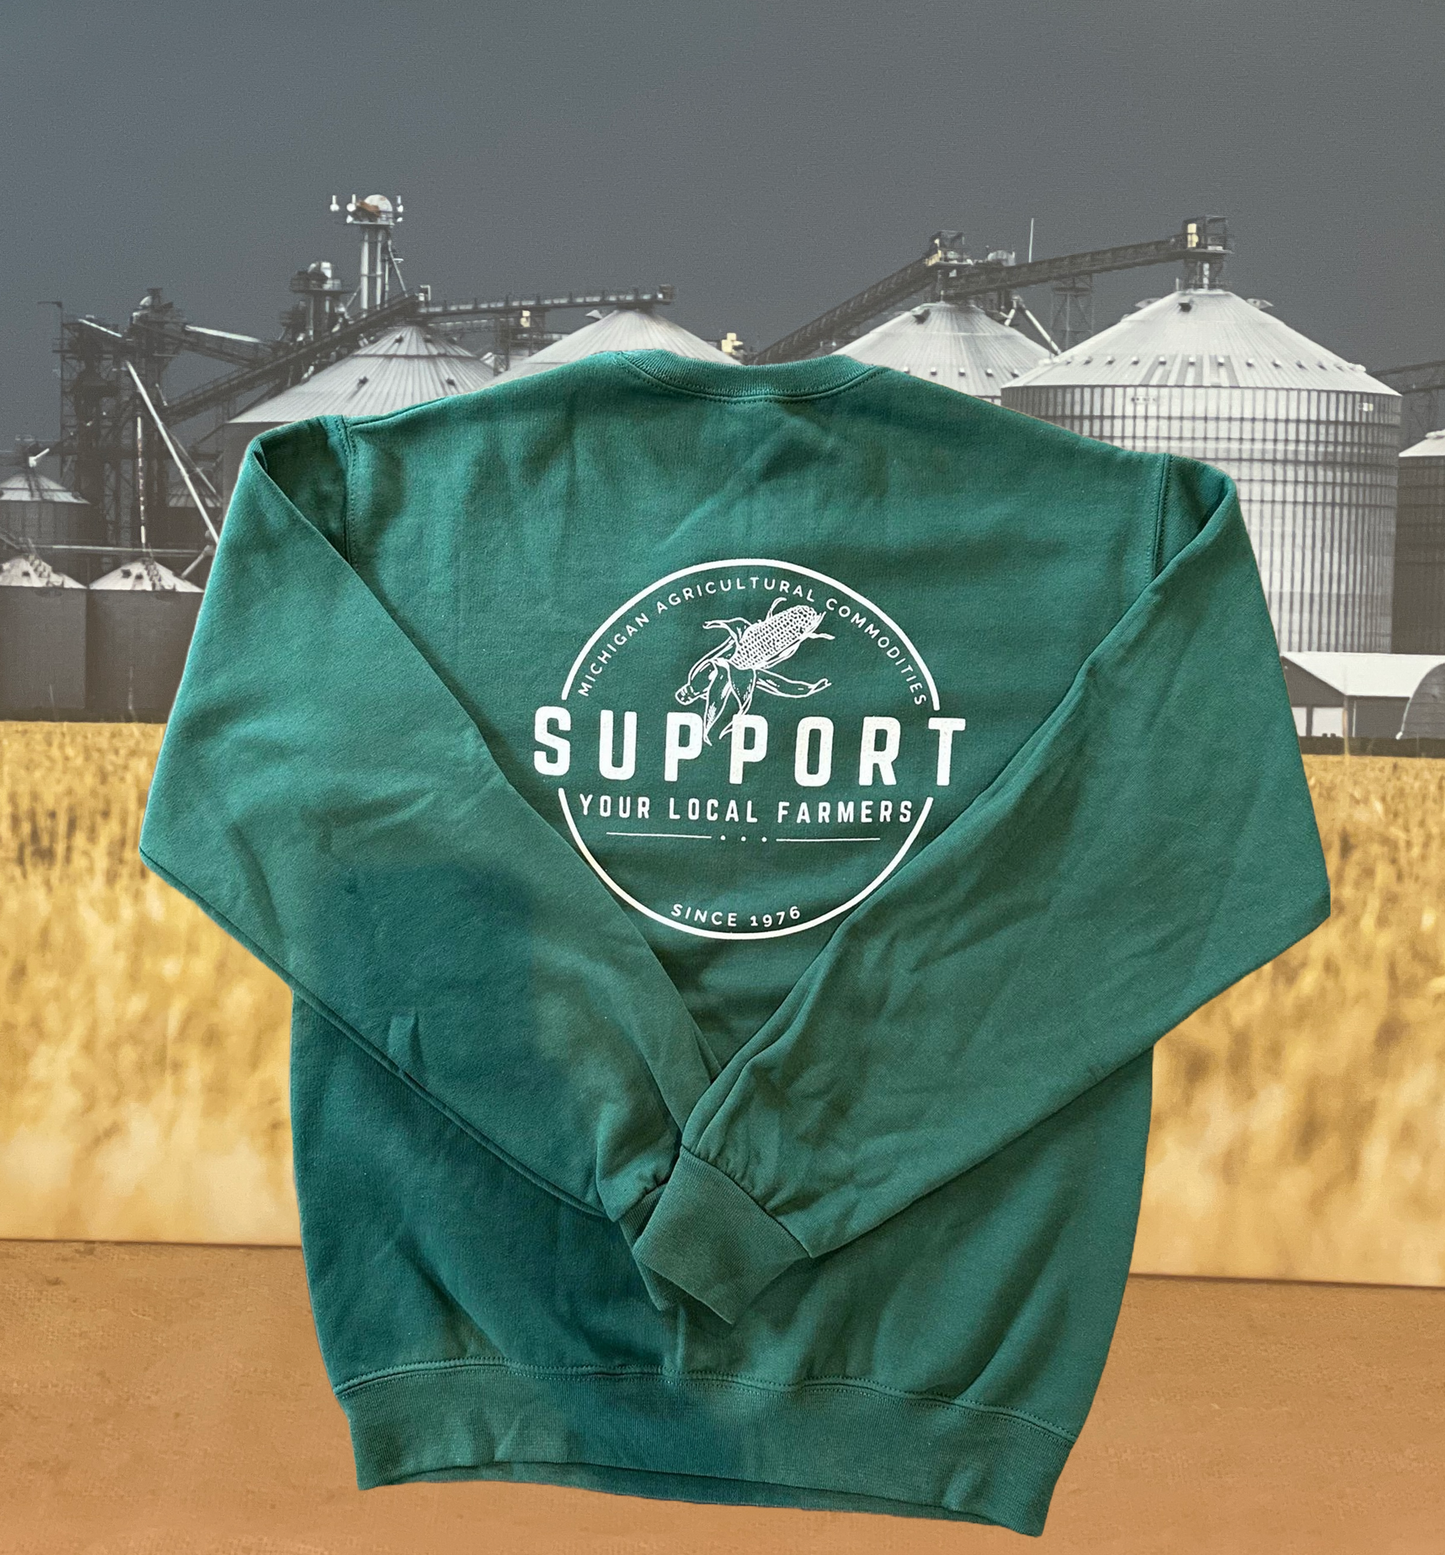 M.A.C. SUPPORT YOUR LOCAL FARMERS CREW NECK SWEATSHIRT